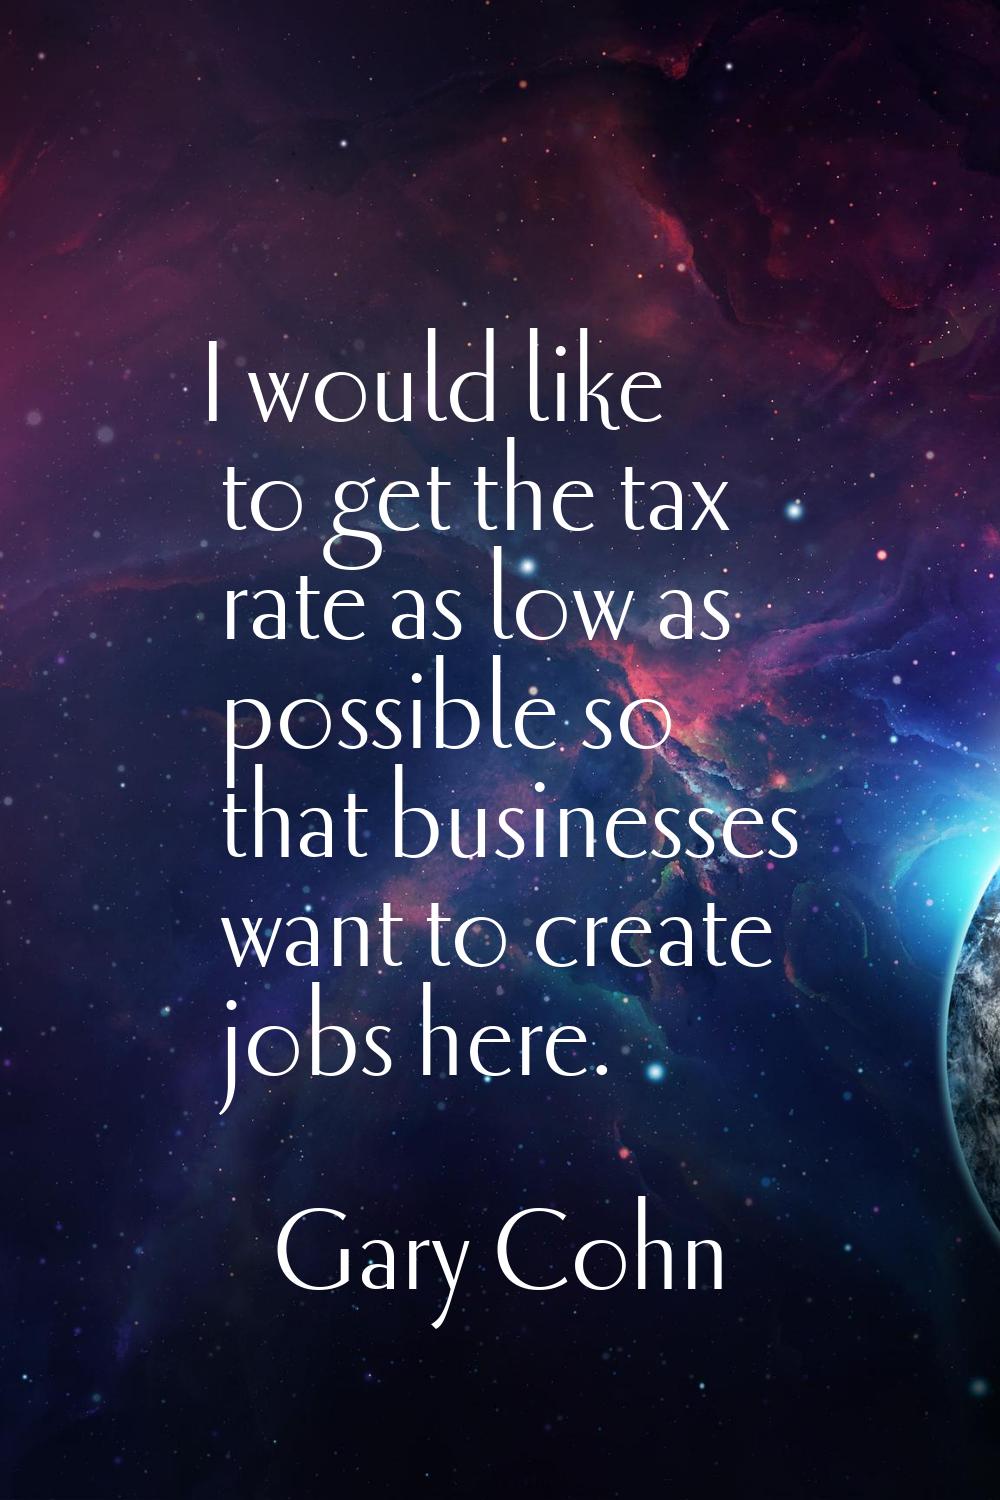 I would like to get the tax rate as low as possible so that businesses want to create jobs here.